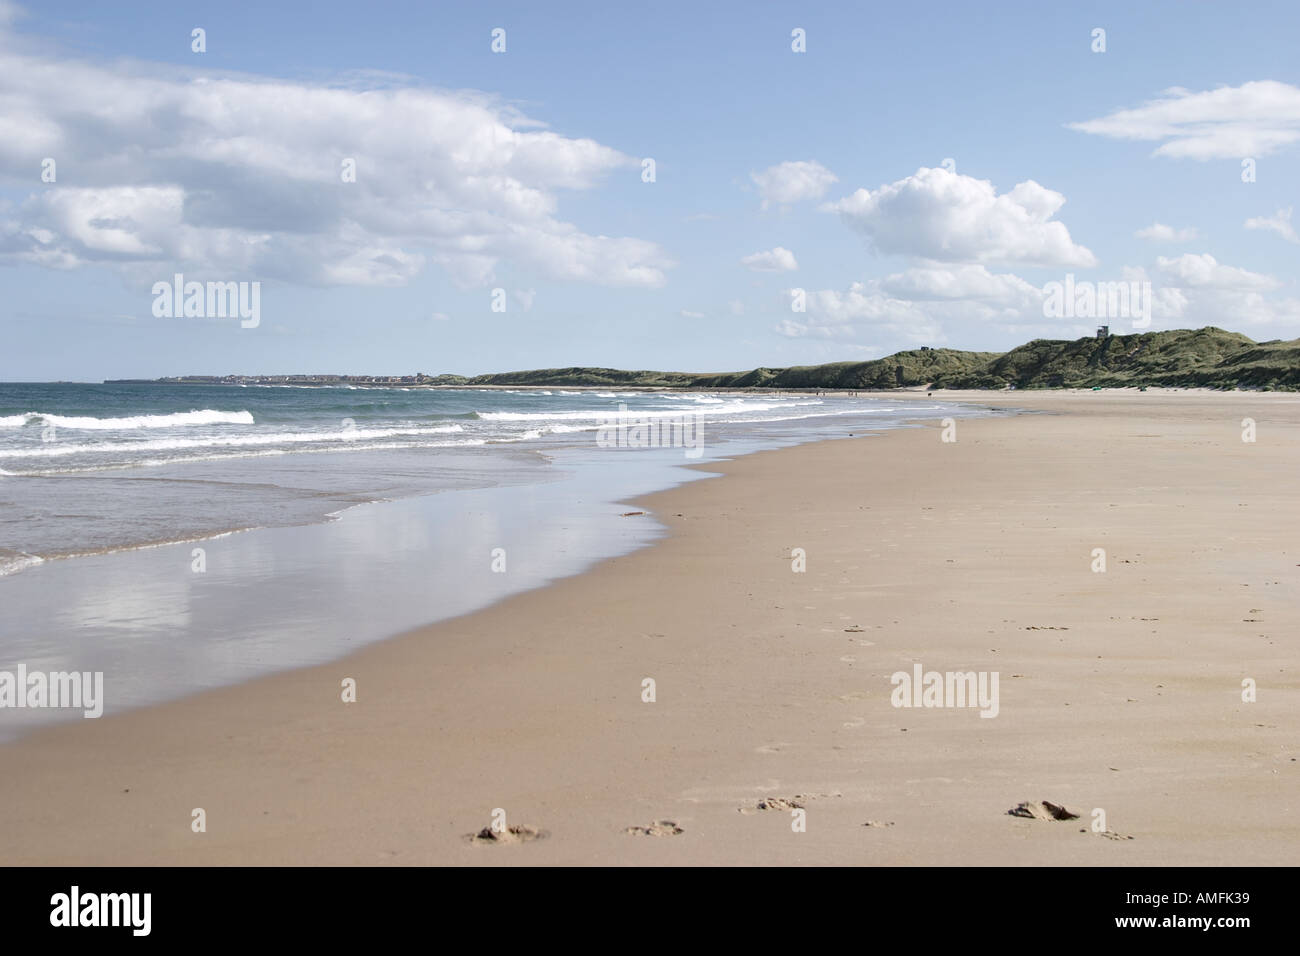 landscape shot showing large expanse of sandy beach with tide coming in Blue sky with white clouds and sand dunes Stock Photo